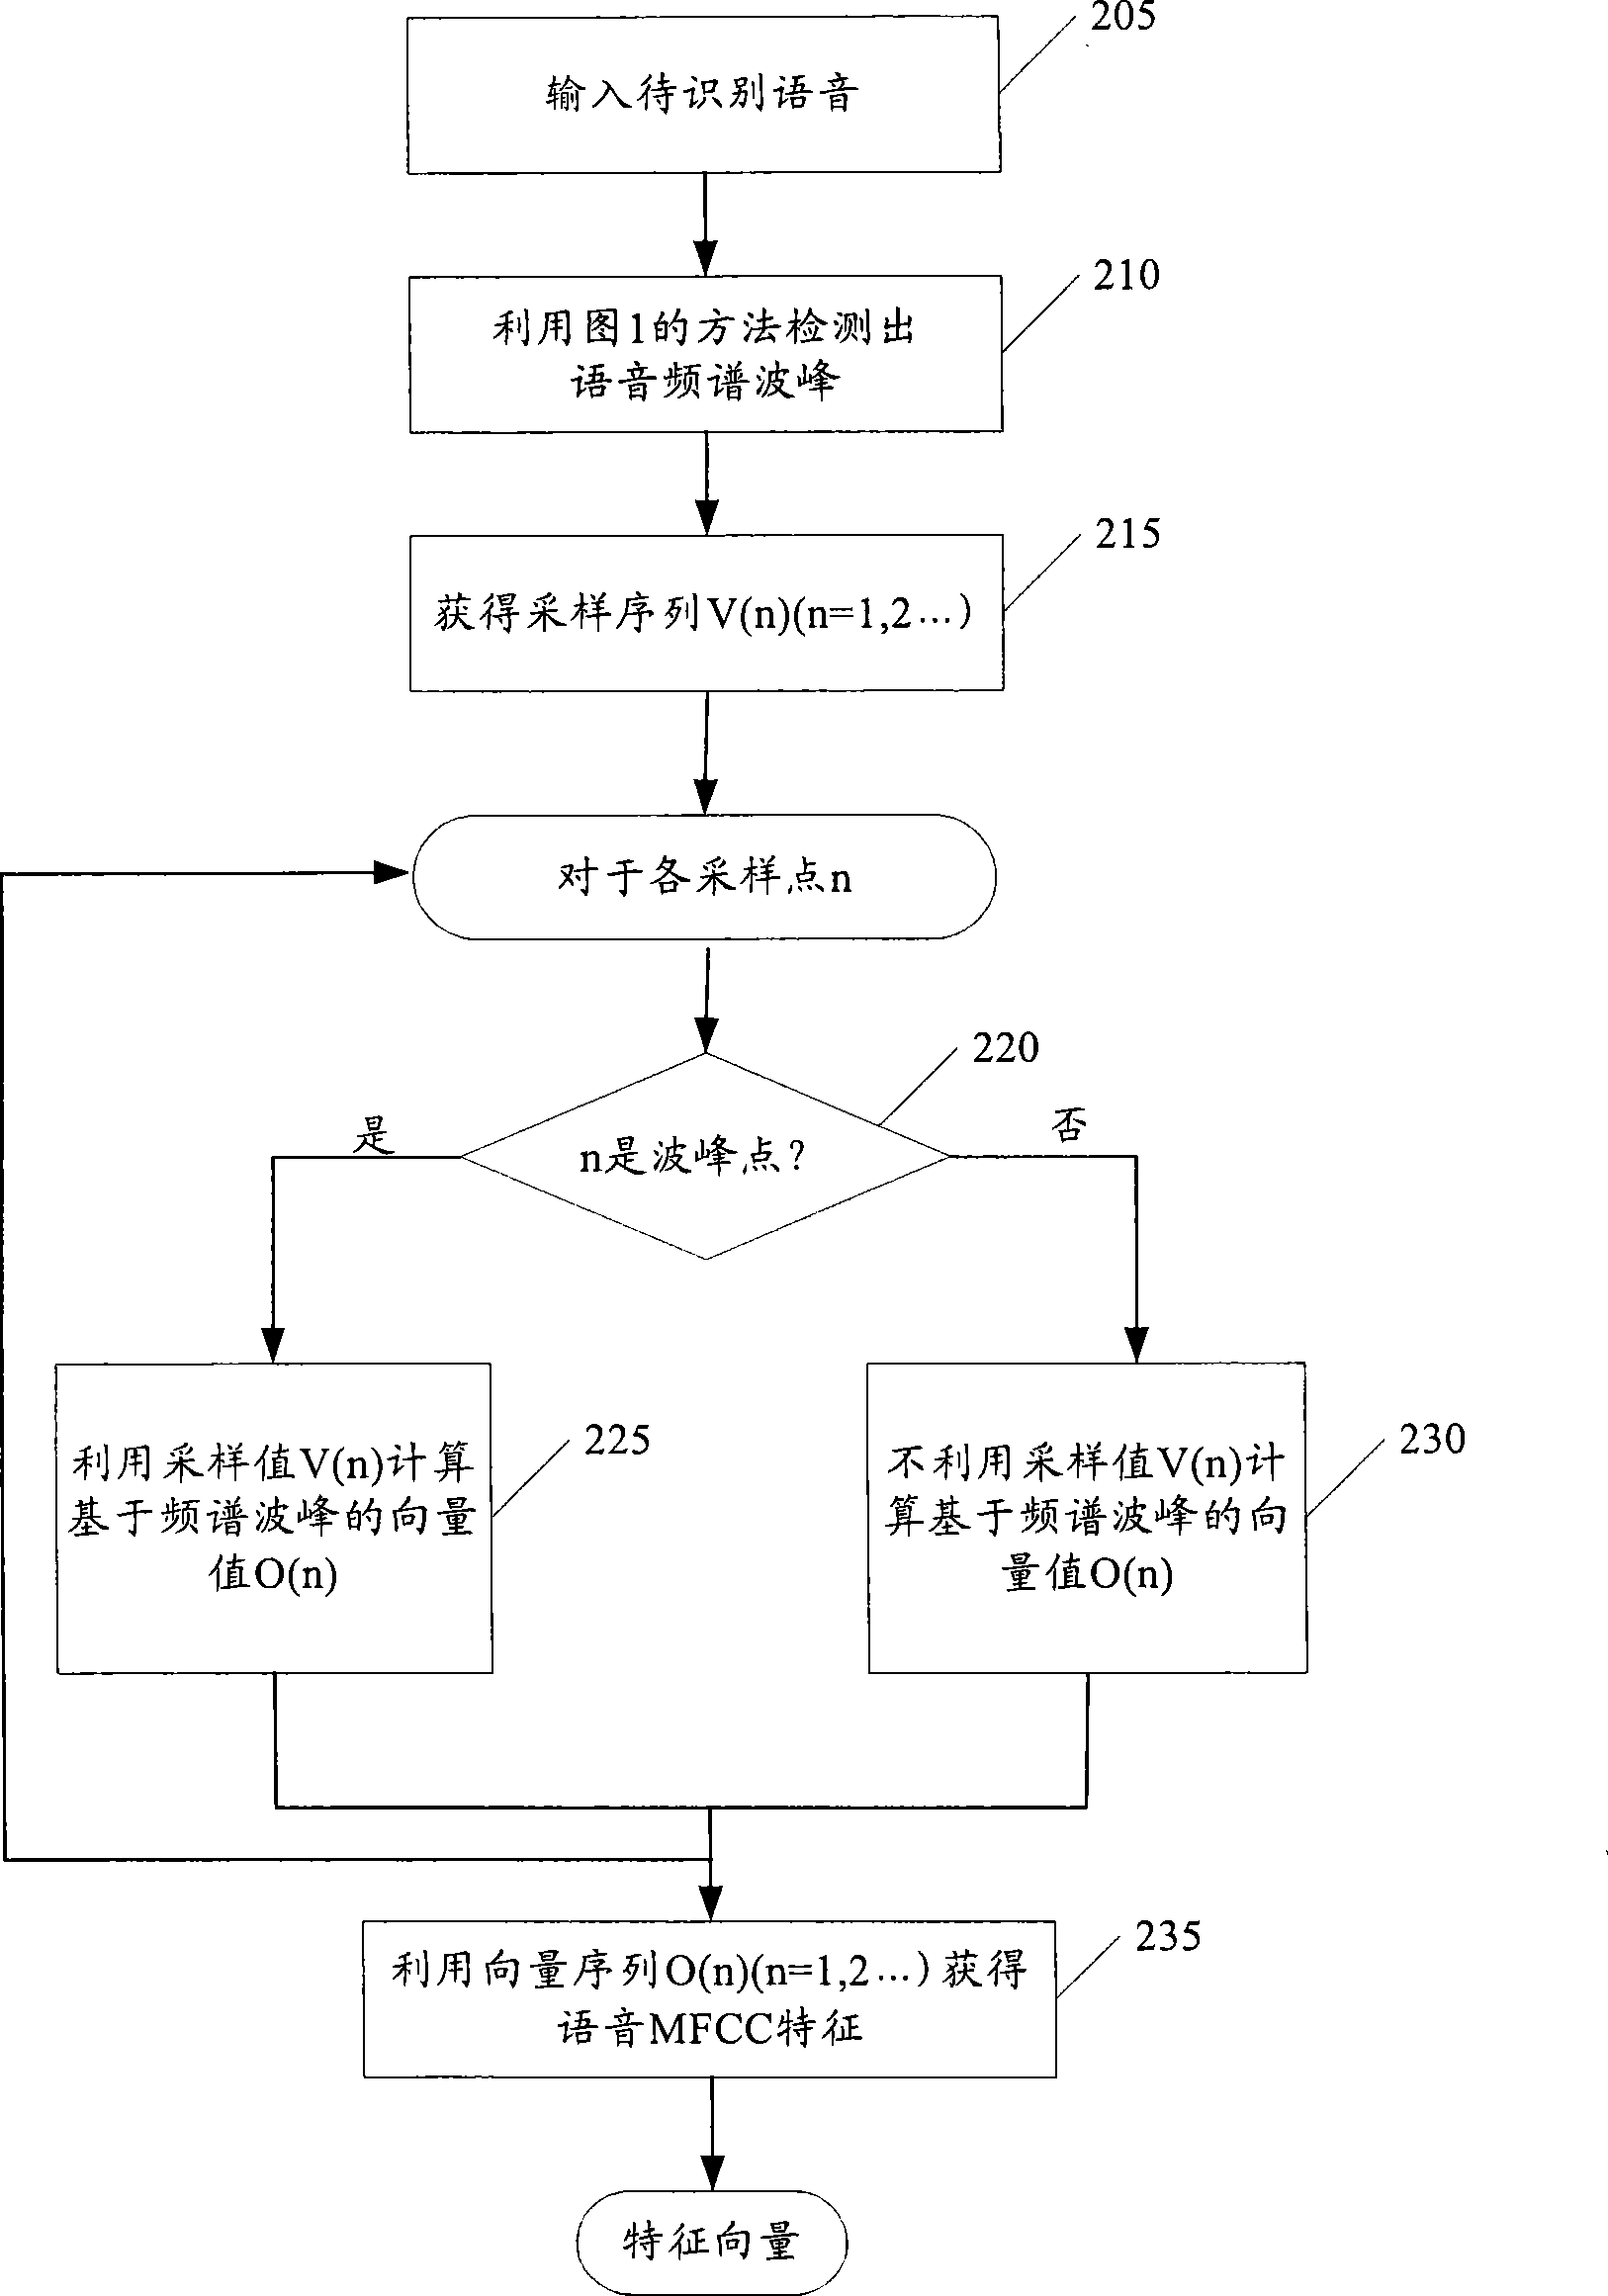 Method and system for detecting phonetic frequency spectrum wave crest and phonetic identification